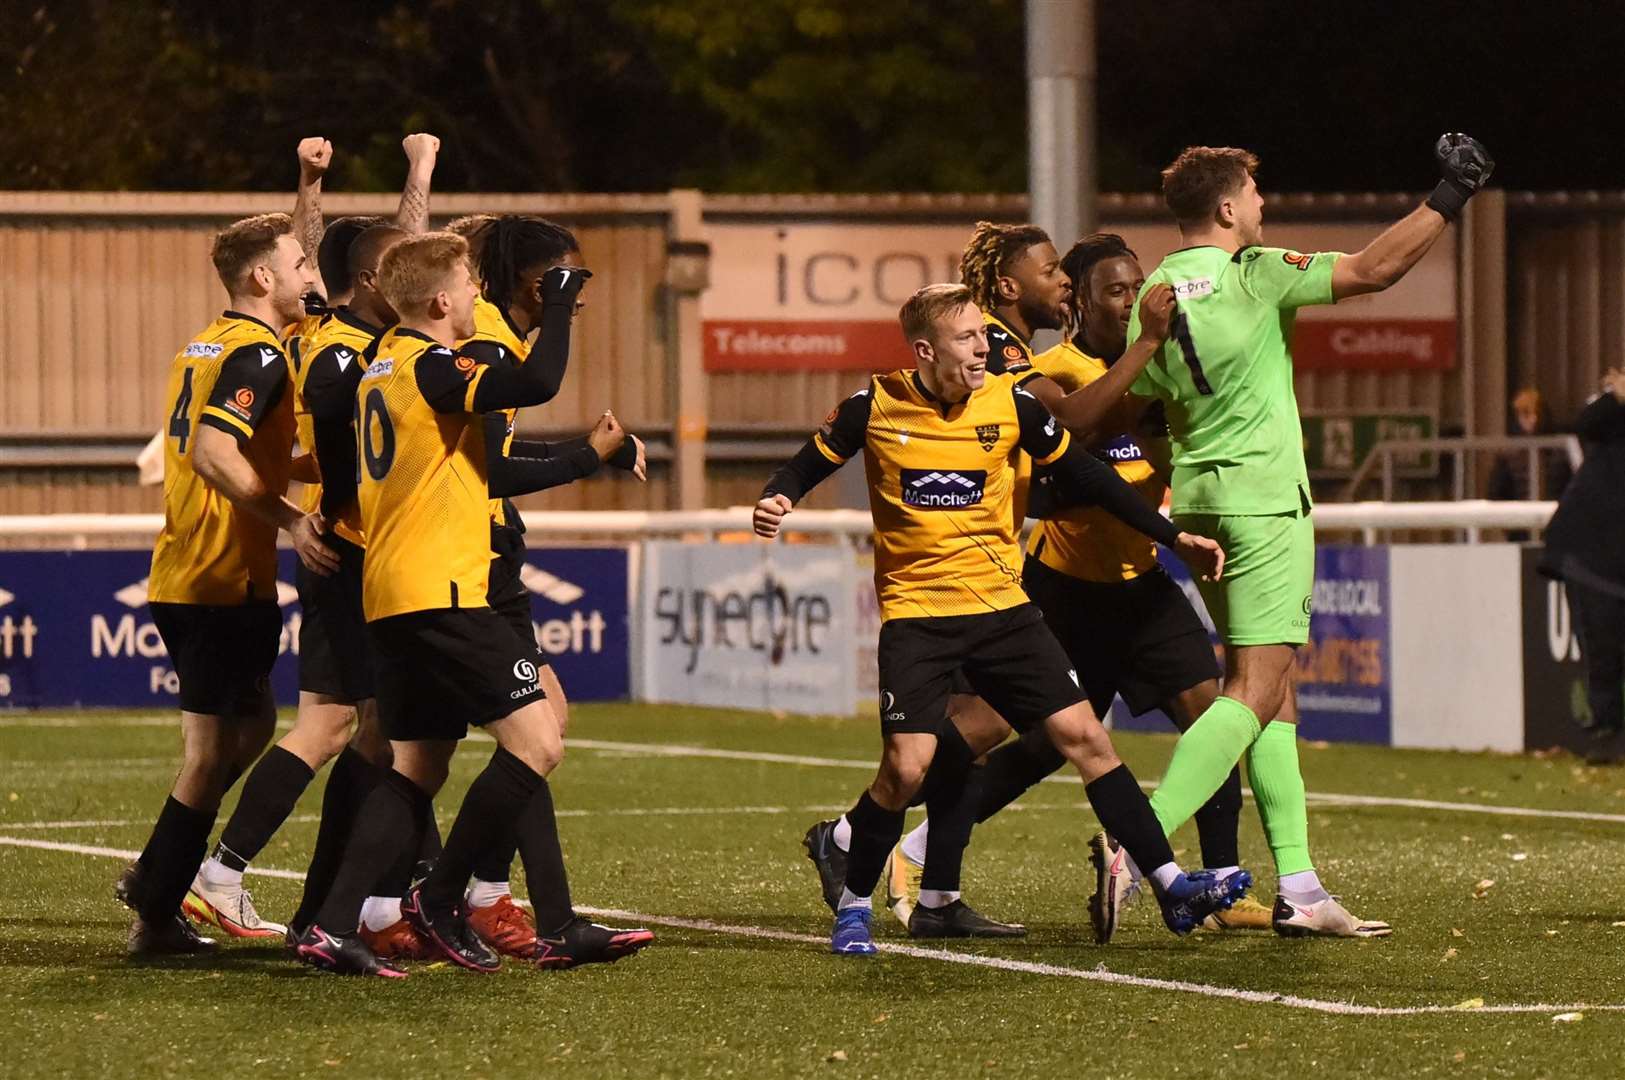 Tom Hadler and his Maidstone team-mates celebrate shoot-out success against Billericay Picture: Steve Terrell